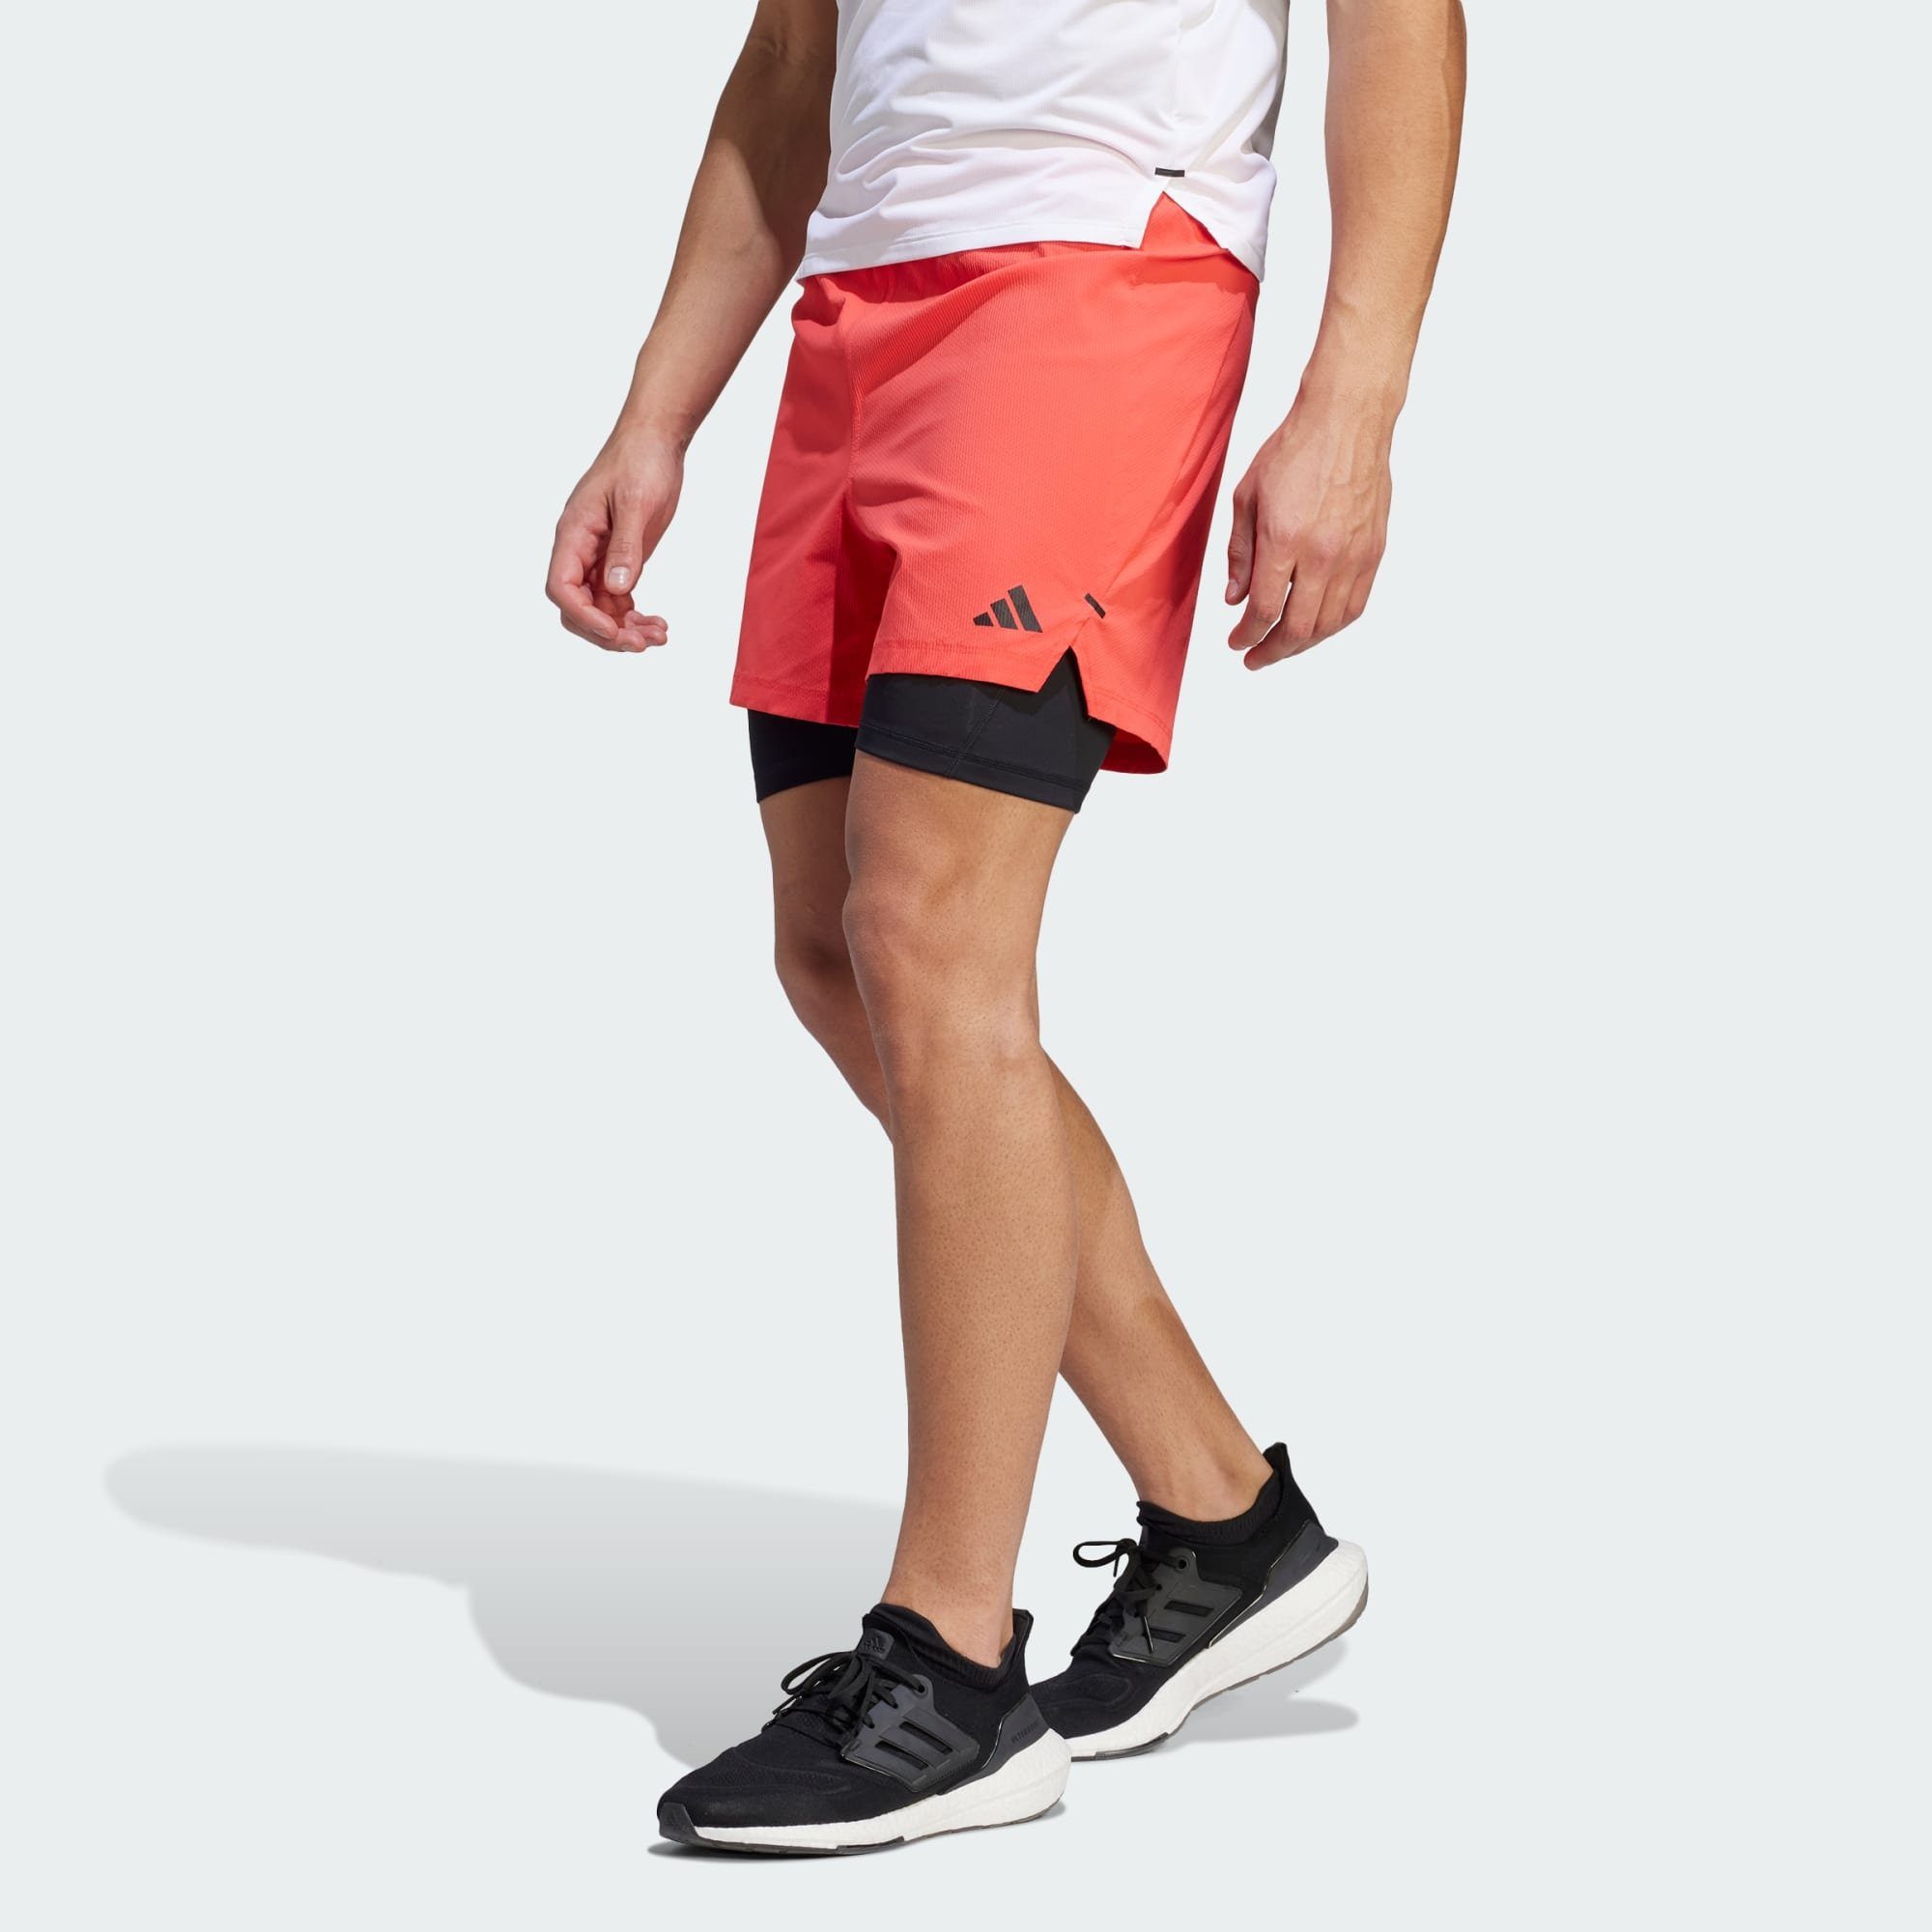 Black Red POWER Bright WORKOUT SHORTS Black Performance / / TWO-IN-ONE 2-in-1-Shorts adidas